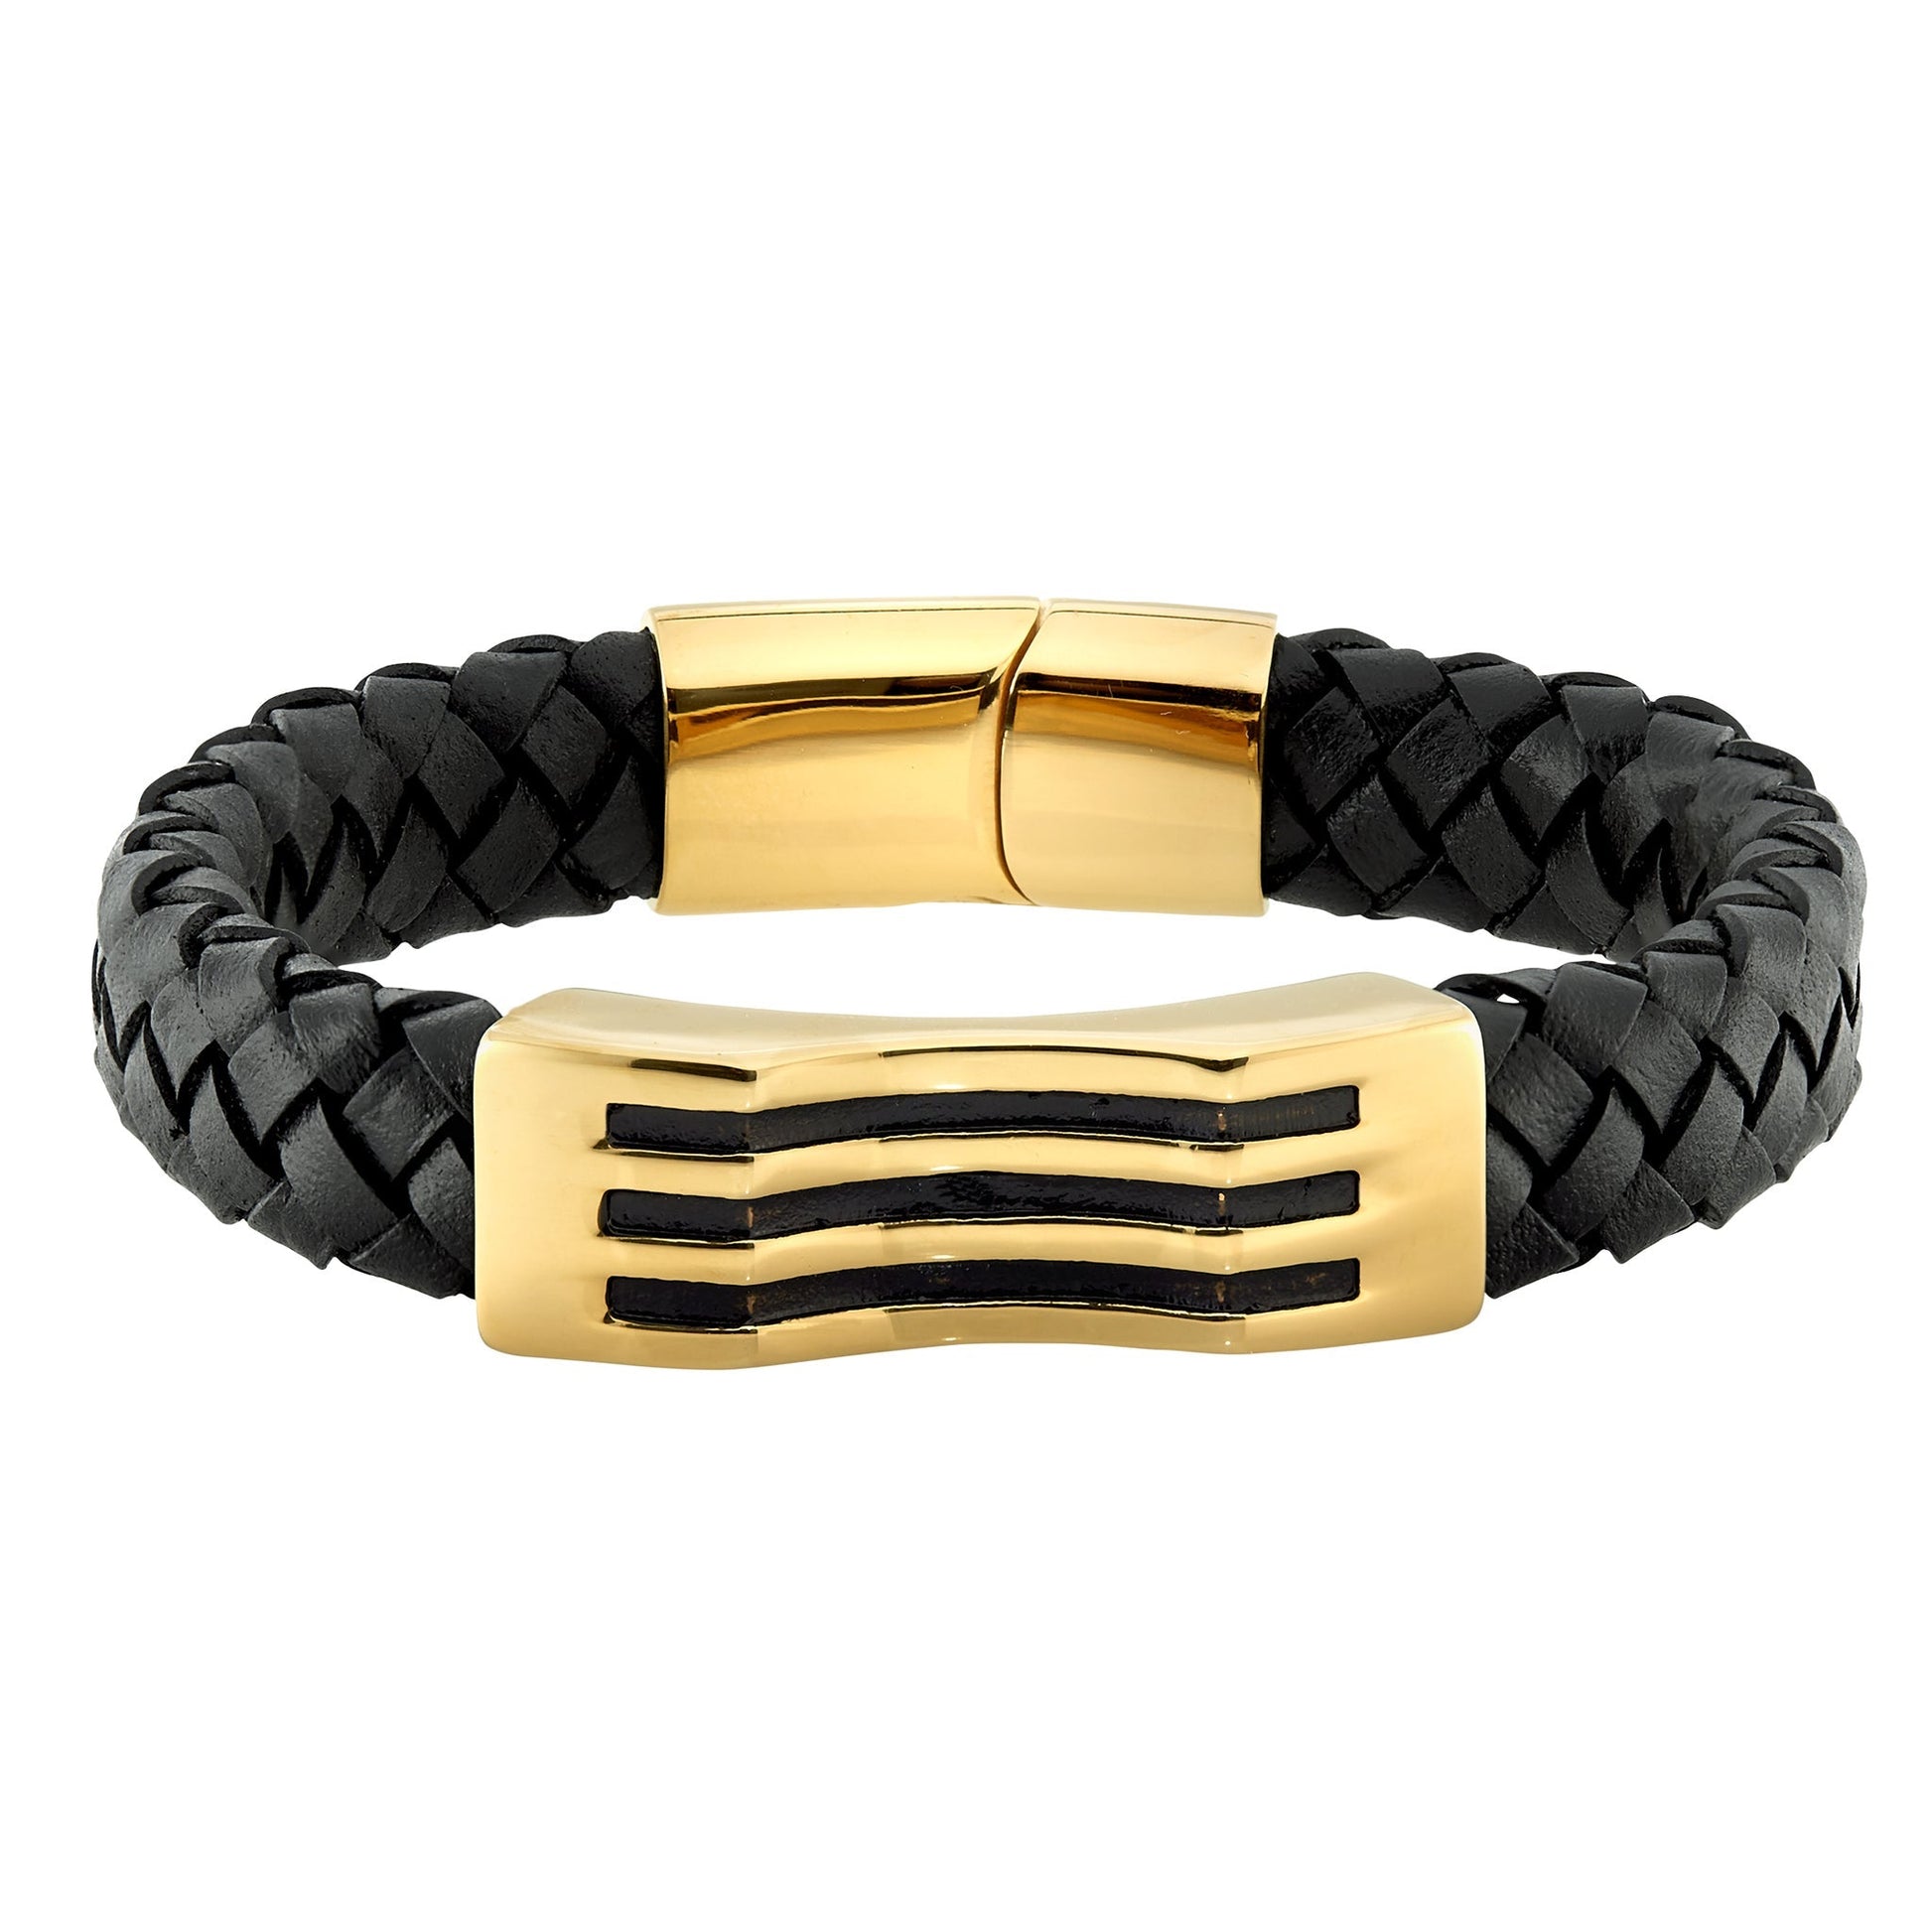 A black braided leather stainless steel with gold bar and black lines bracelet displayed on a neutral white background.